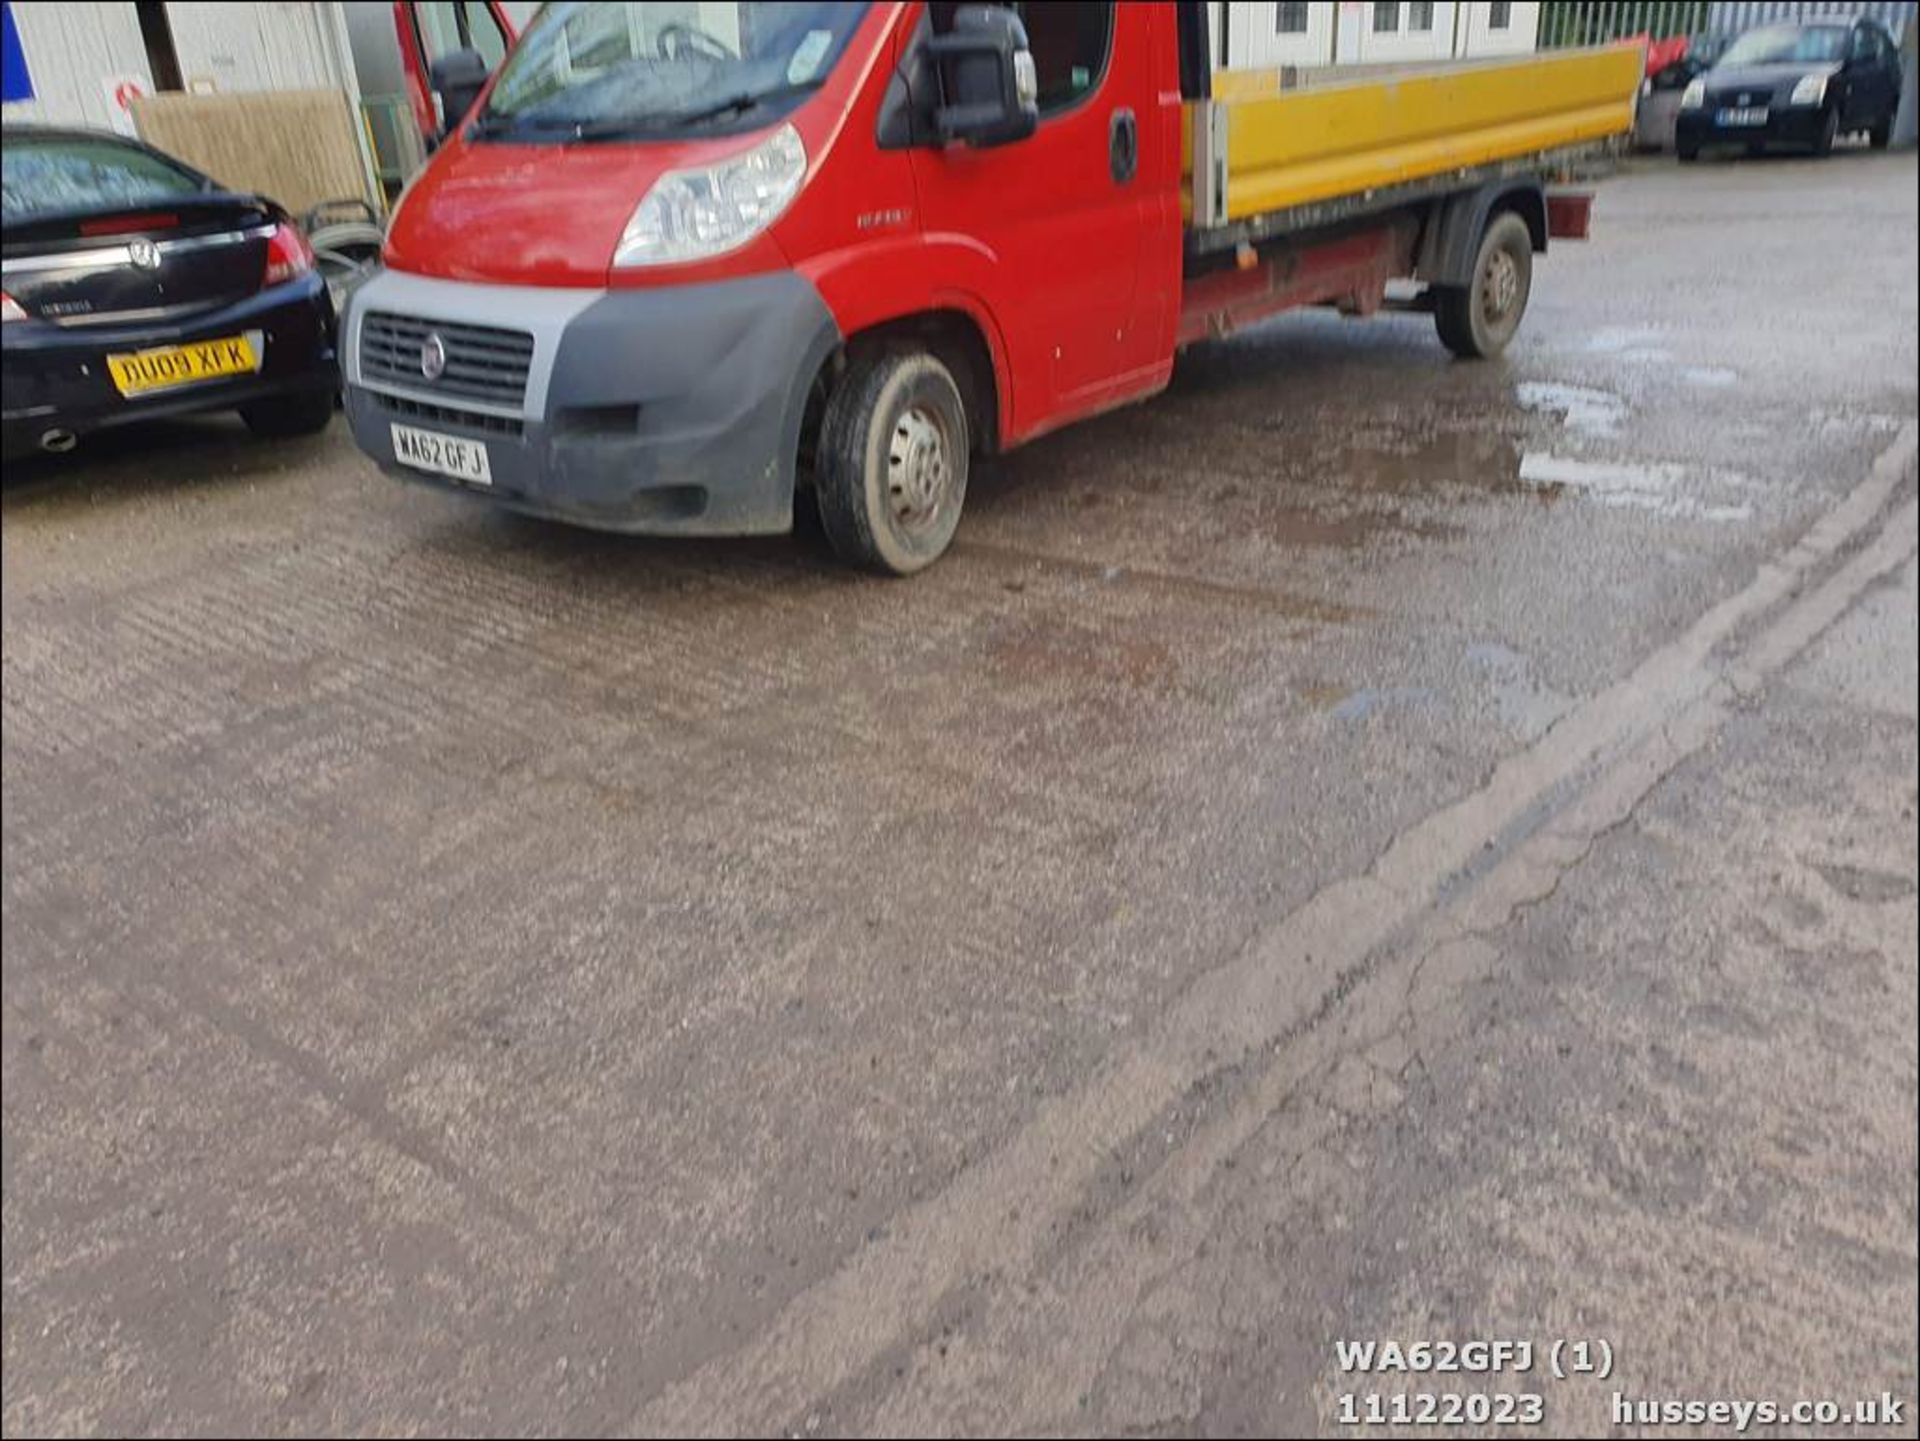 12/62 FIAT DUCATO 35 MULTIJET - 2287cc 2.dr Flat Bed (Red) - Image 2 of 52